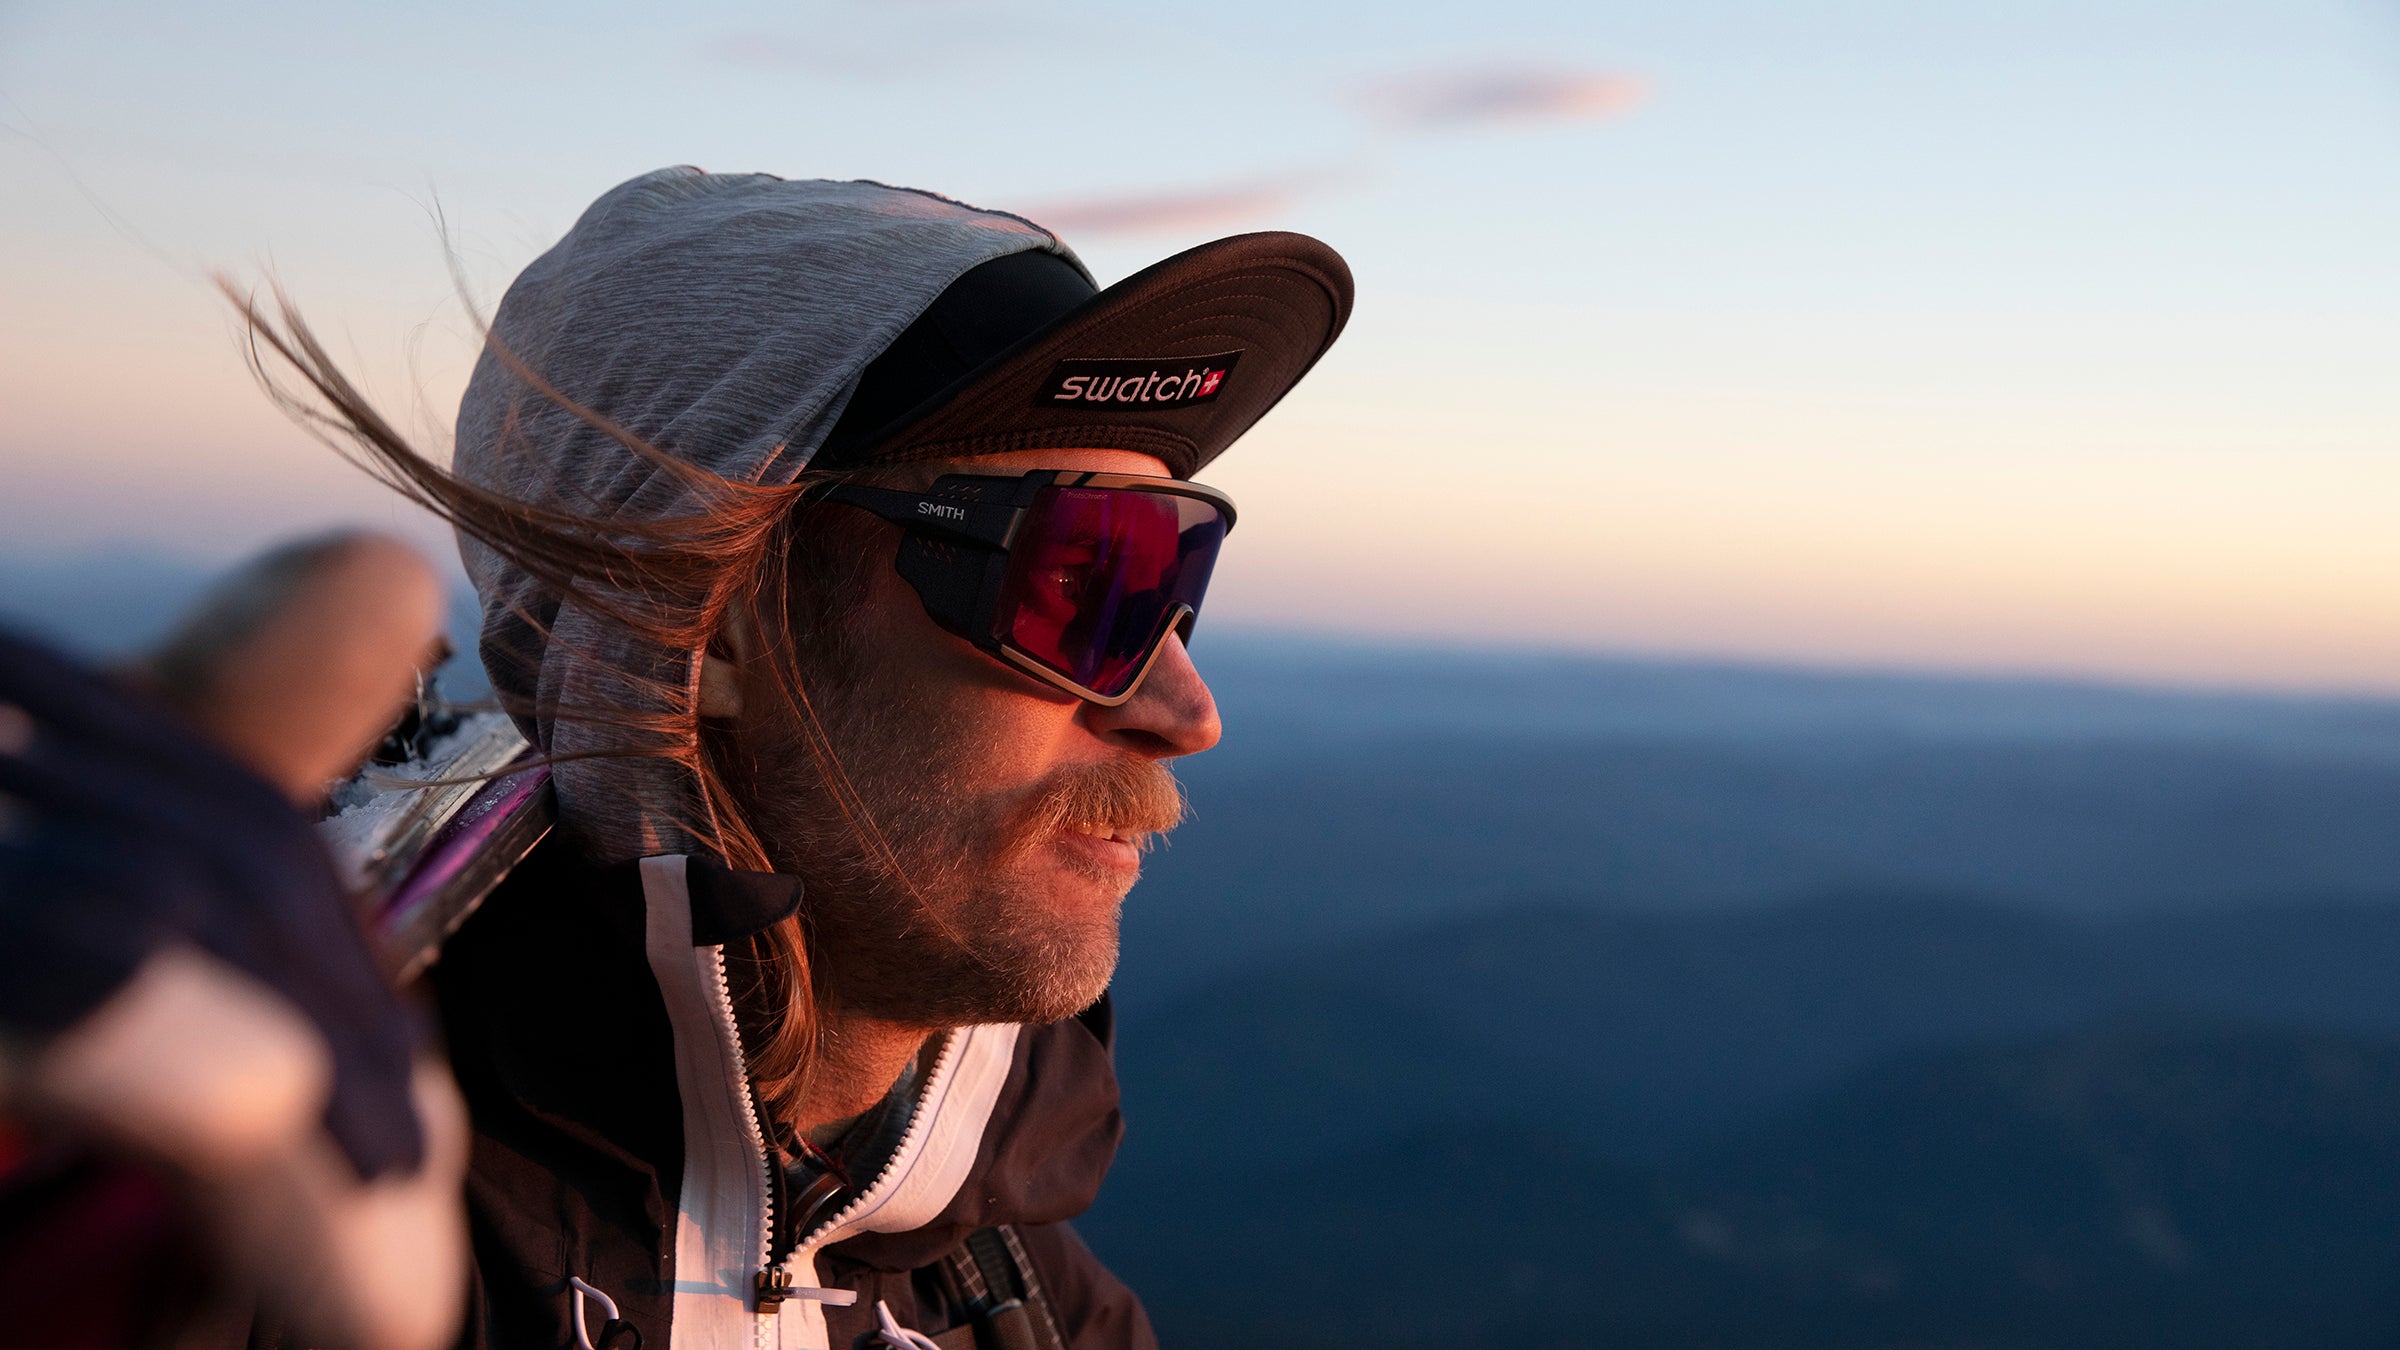 The Best Glacier Sunglasses for Mountaineering and Backcountry Skiing -  News 